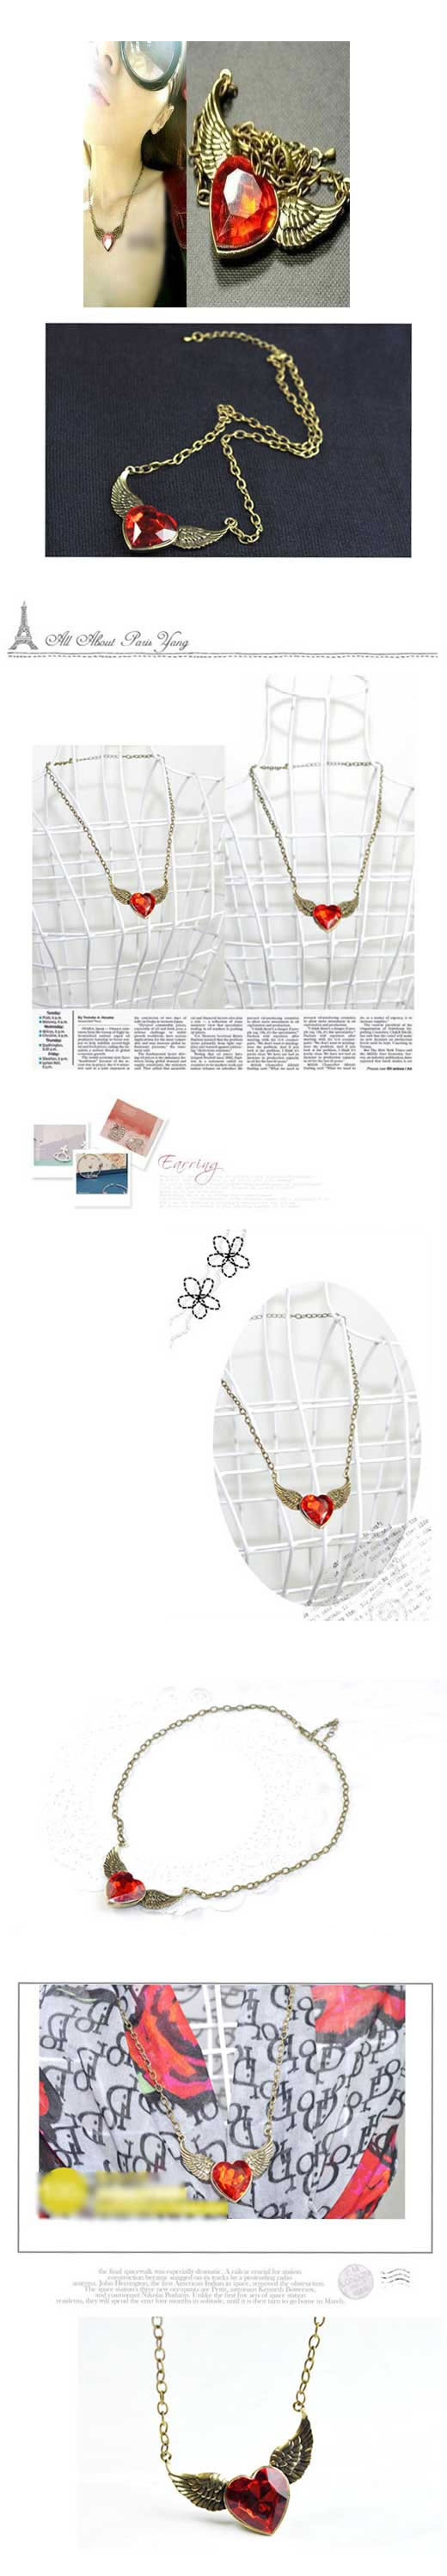 Hiking Bronze Wings With Red Heart Acrylic Korean Necklaces,Korean Necklaces